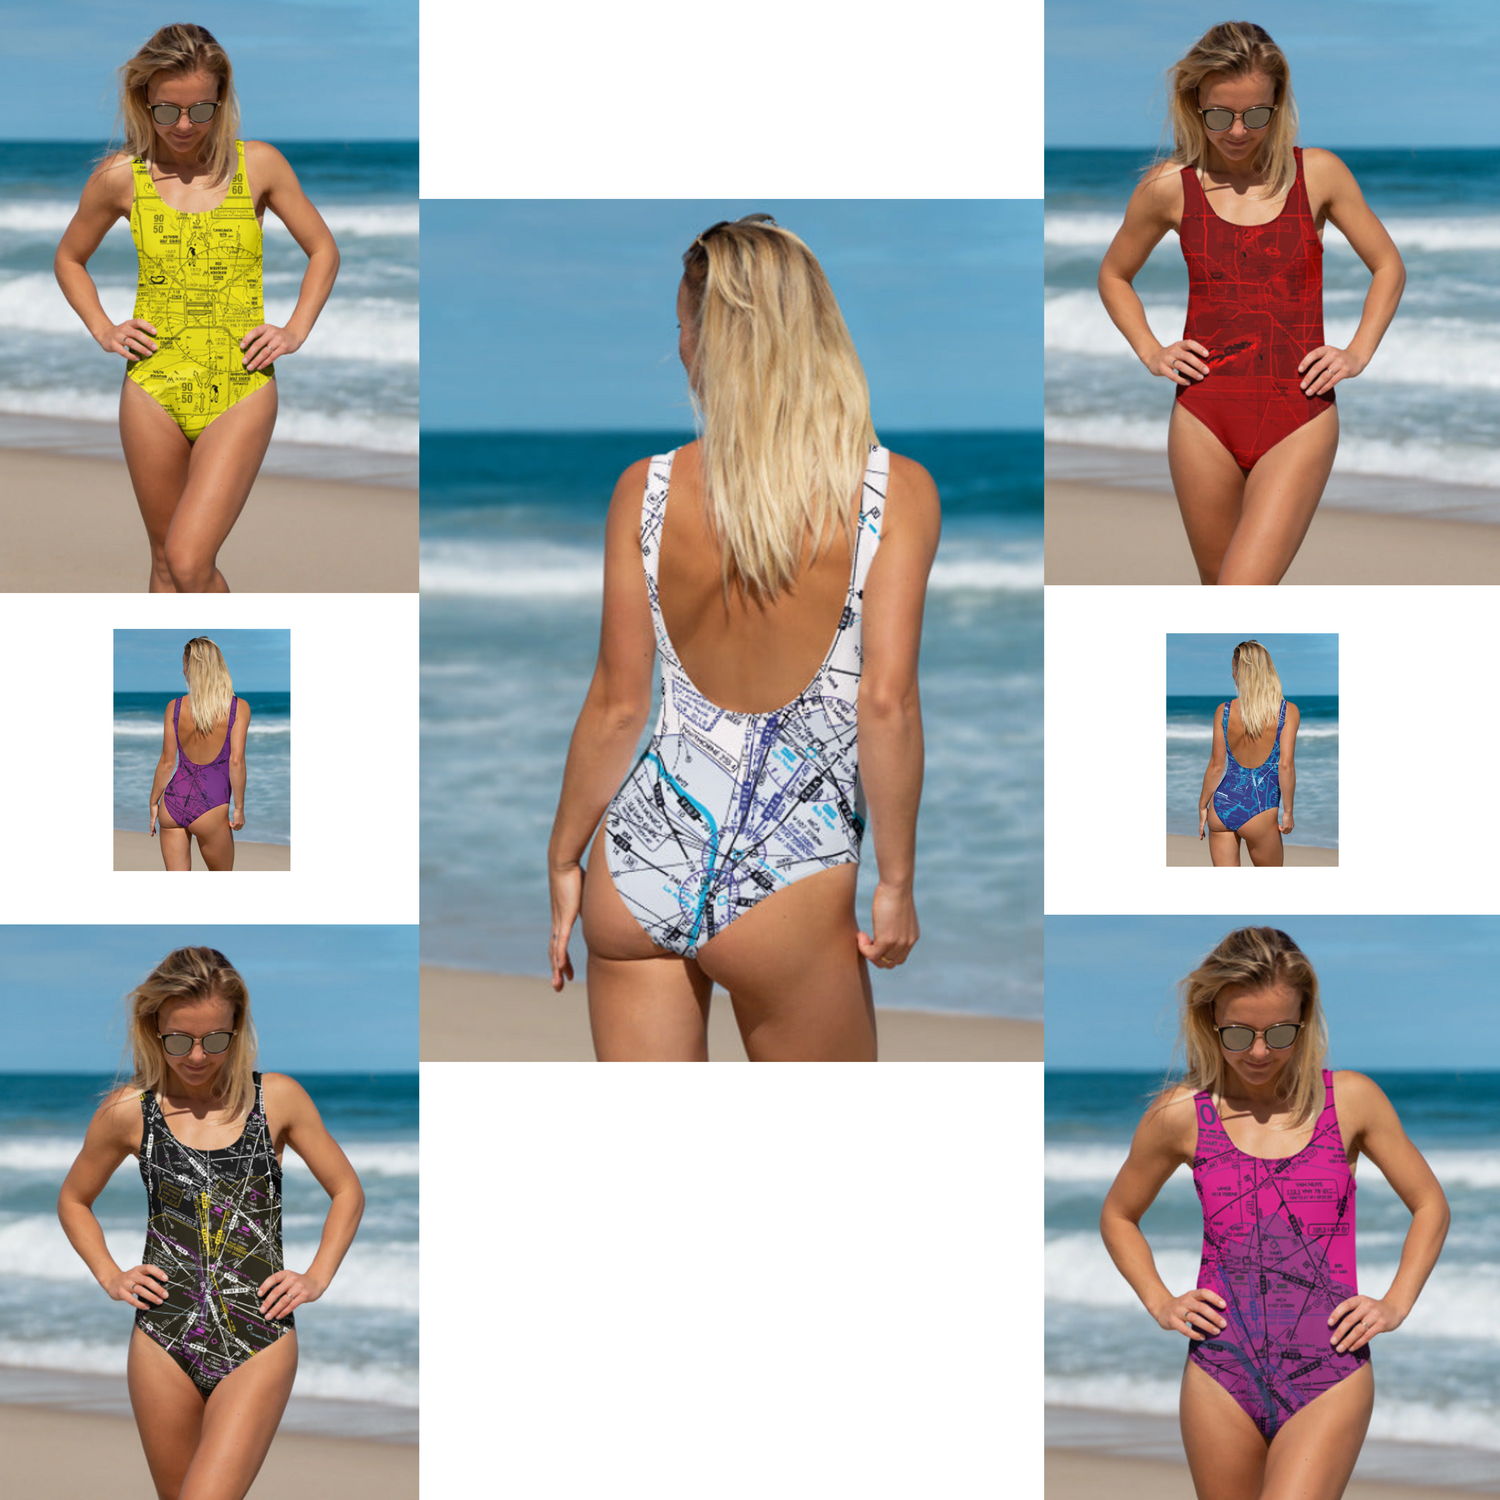 Aviation themed colorful one-piece swimsuits